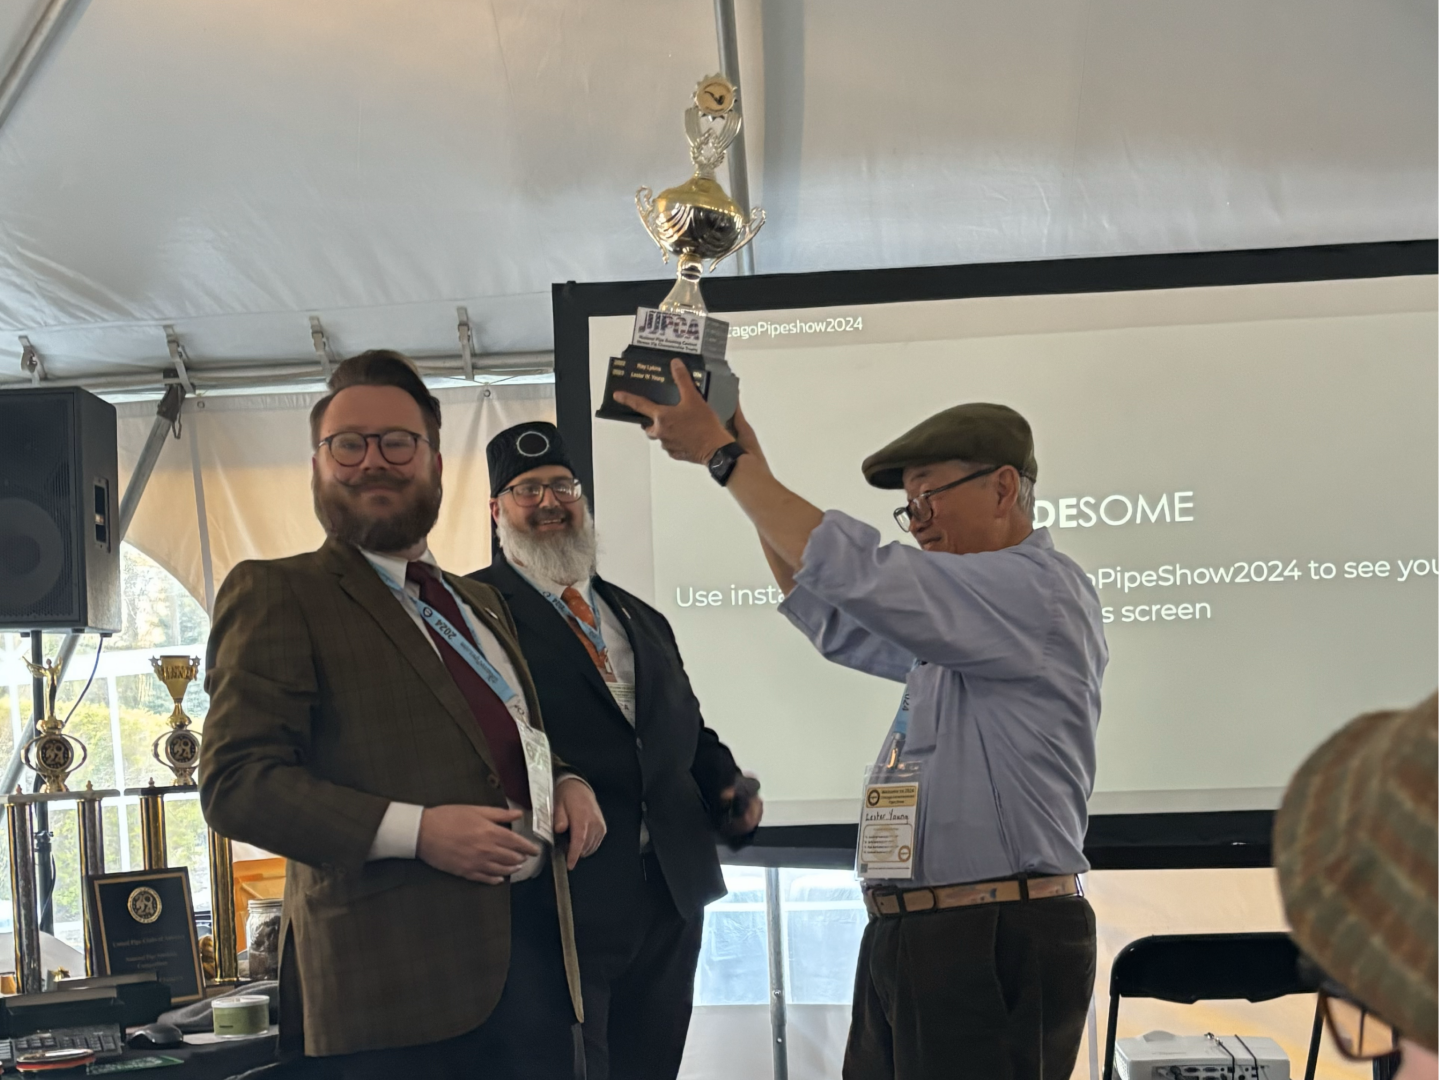 Chicago Pipe Show 2024 - Les Young, Slow Smoke Champion